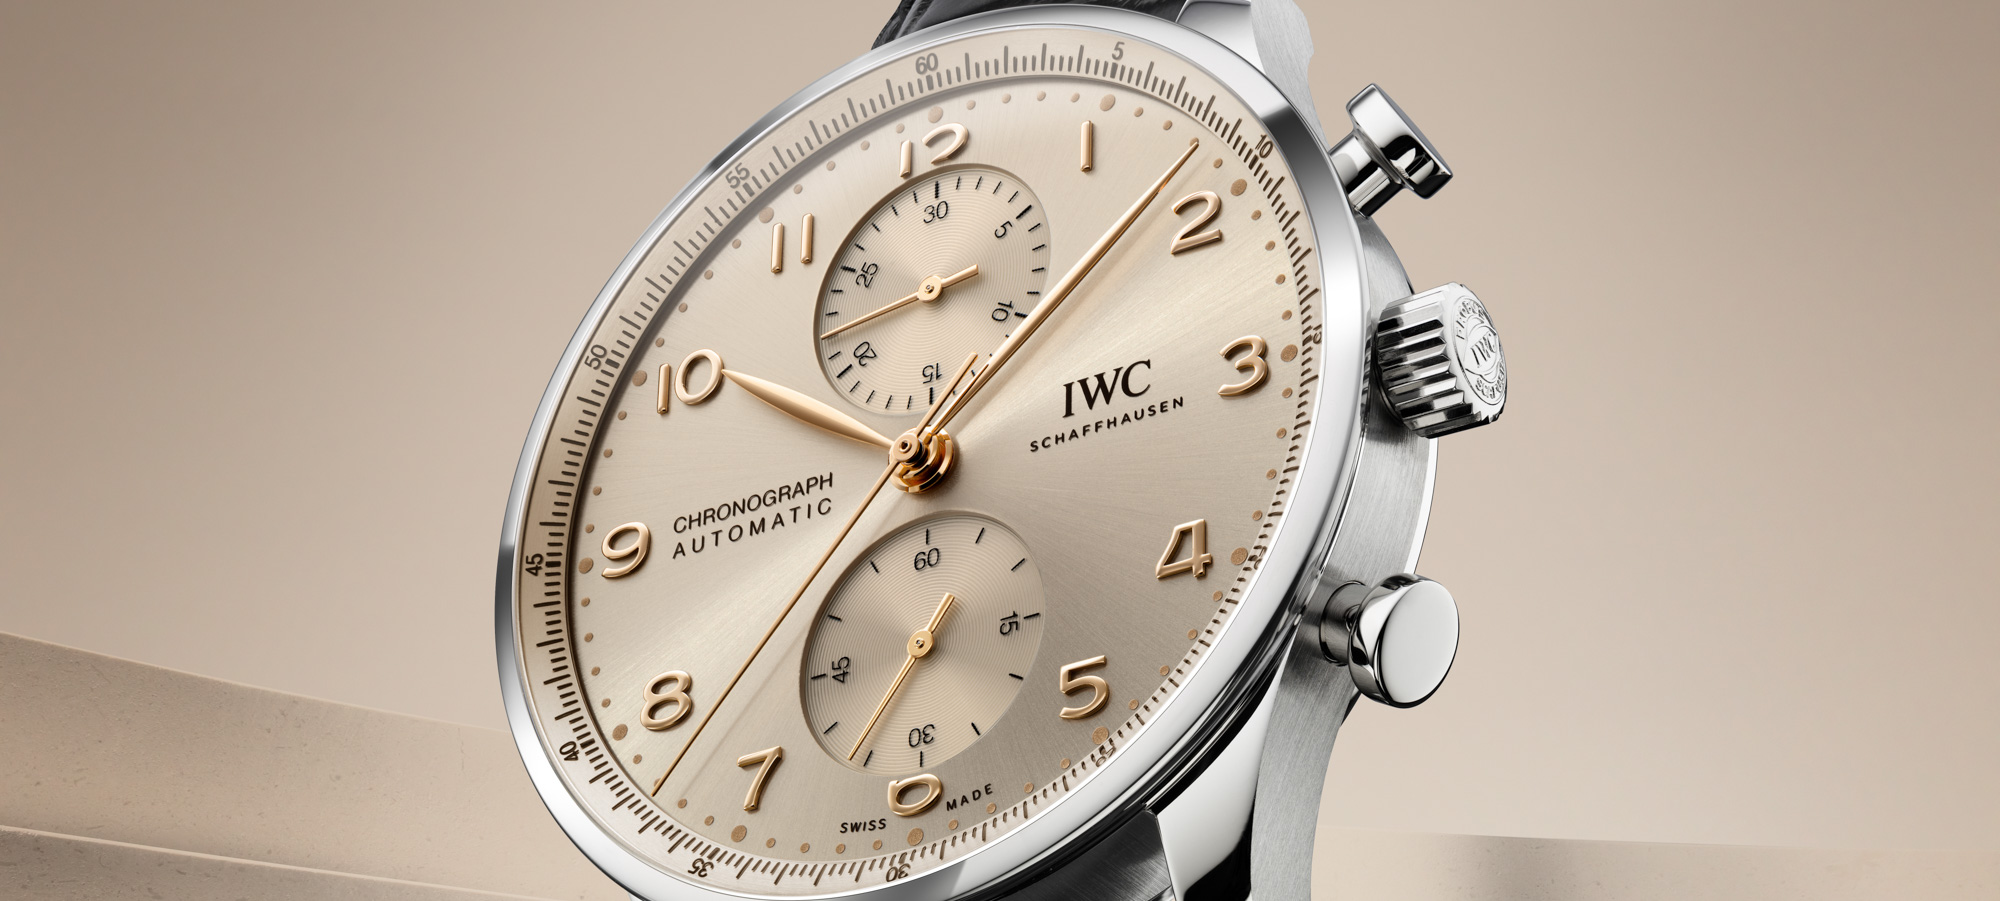 New Release: IWC Portugieser Chronograph Watches | aBlogtoWatch